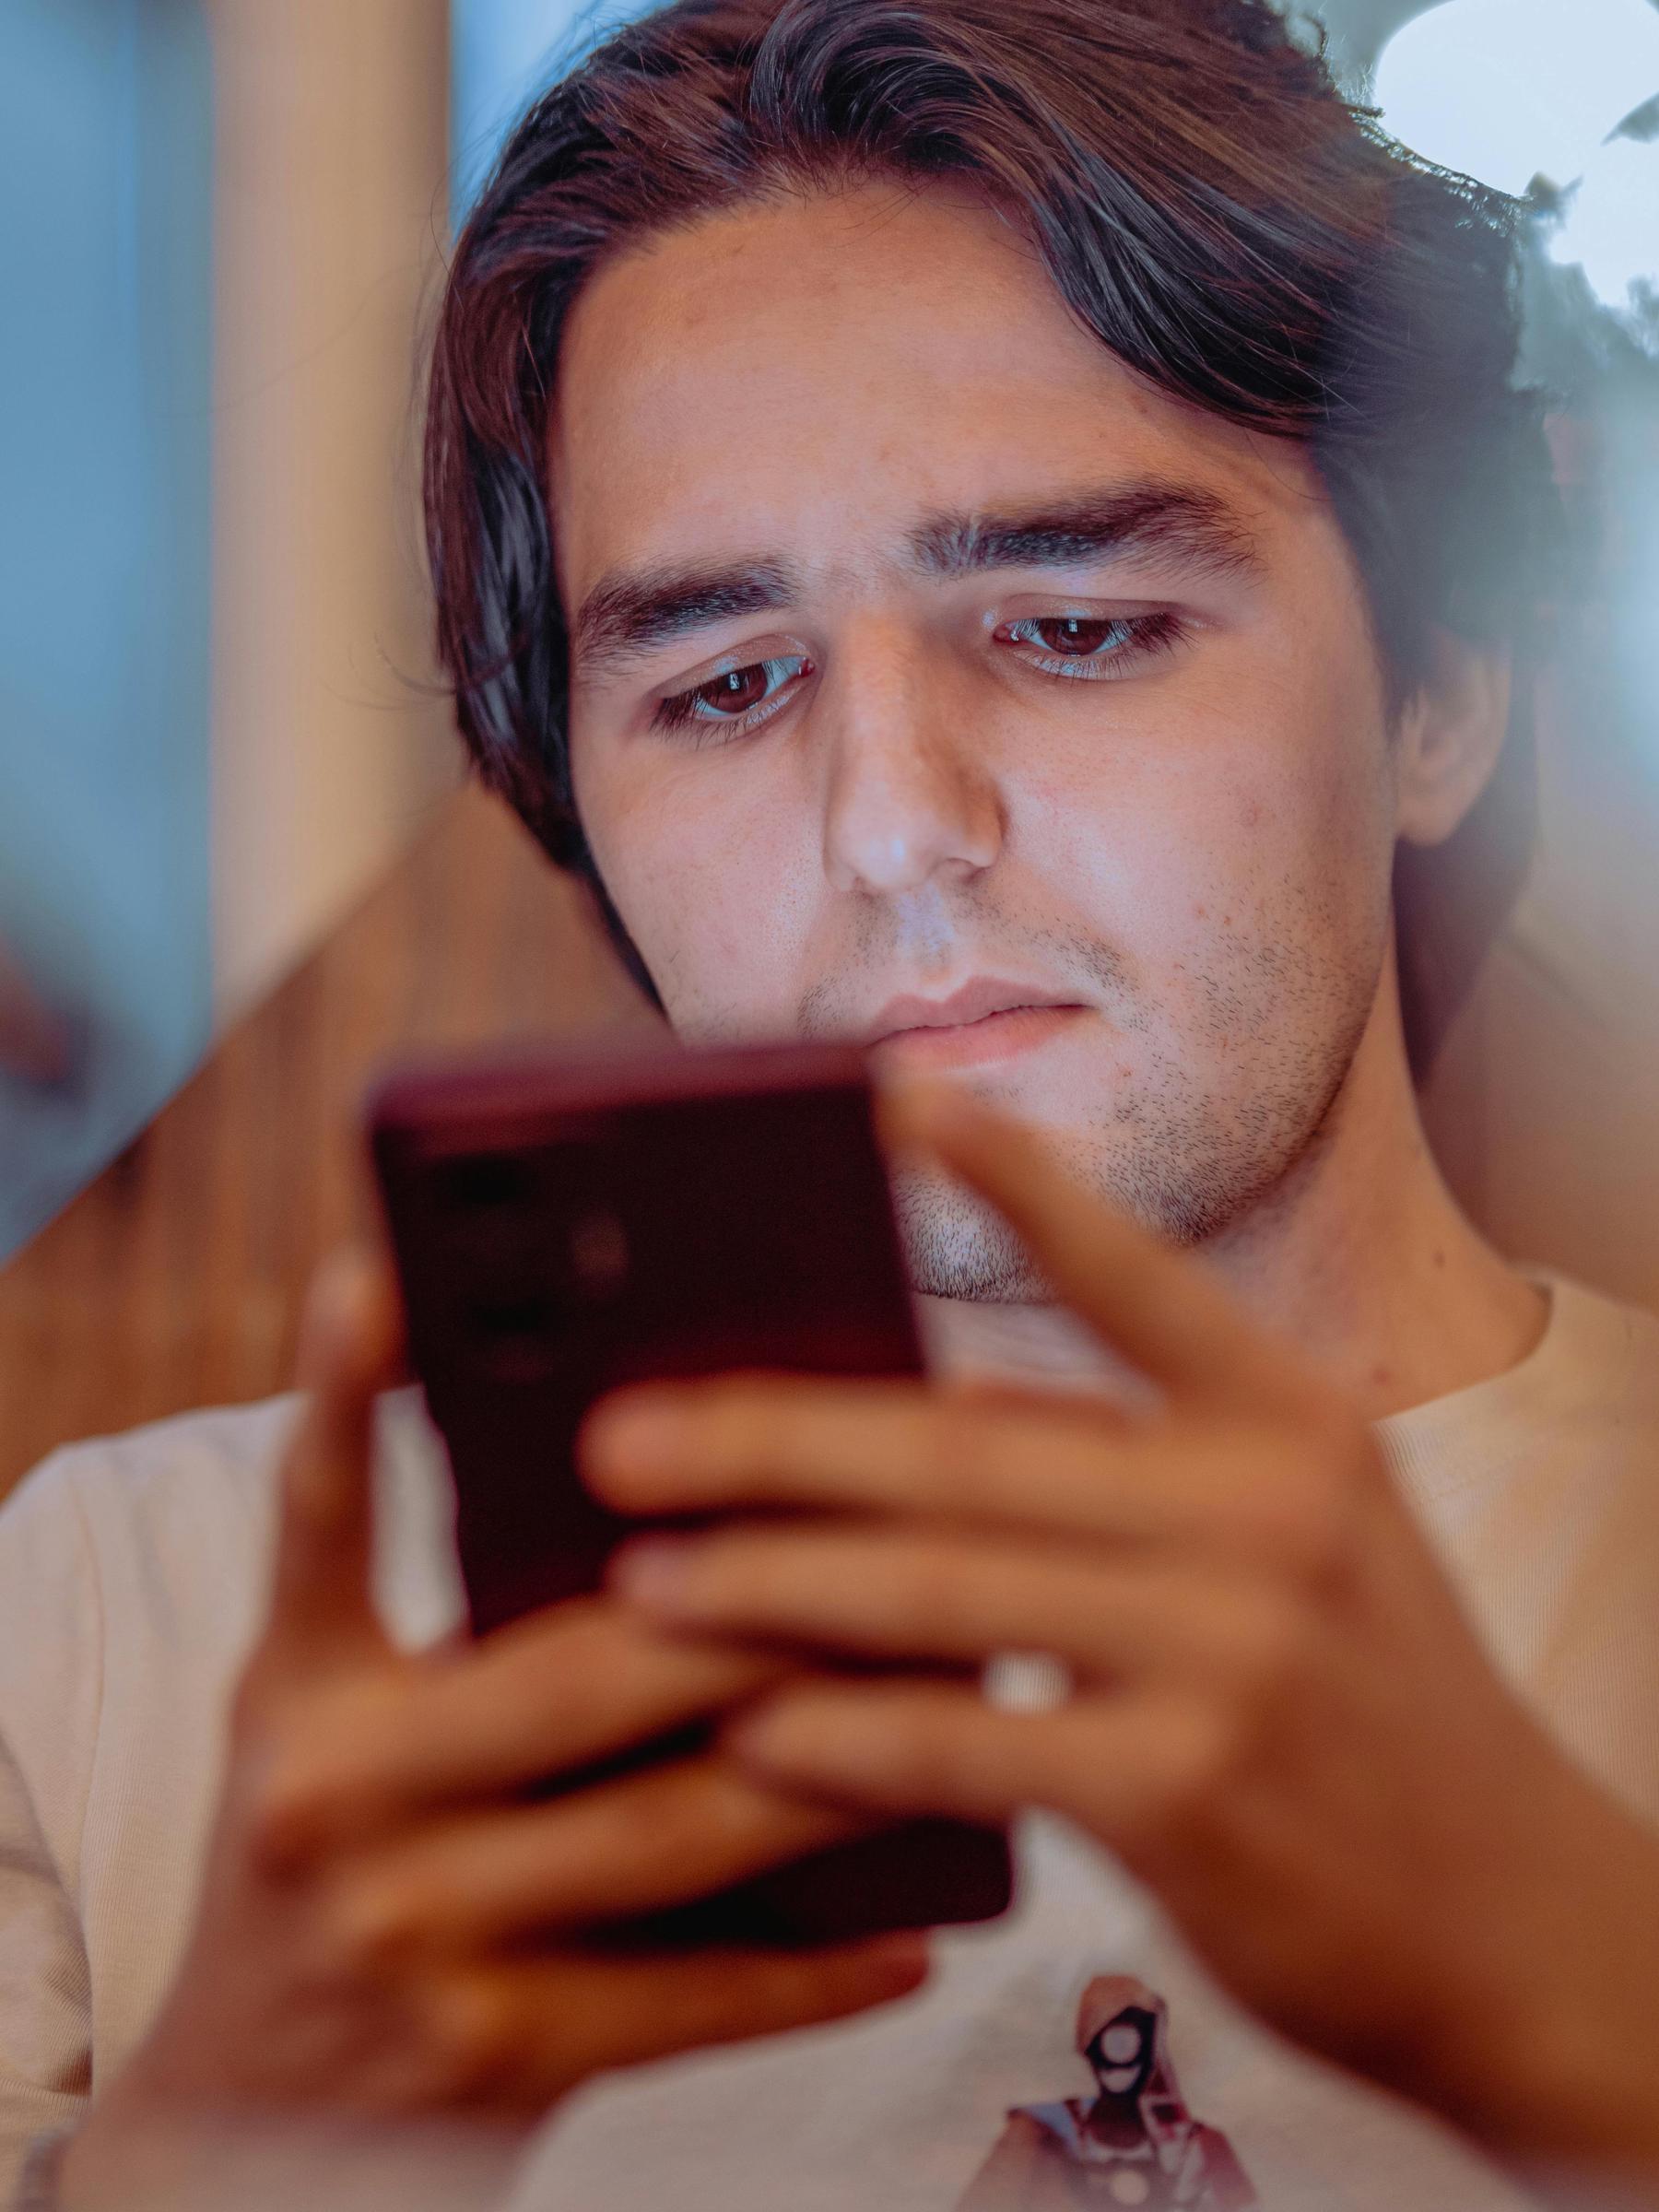 Michael distractedly scrolling through his phone | Source: Pexels